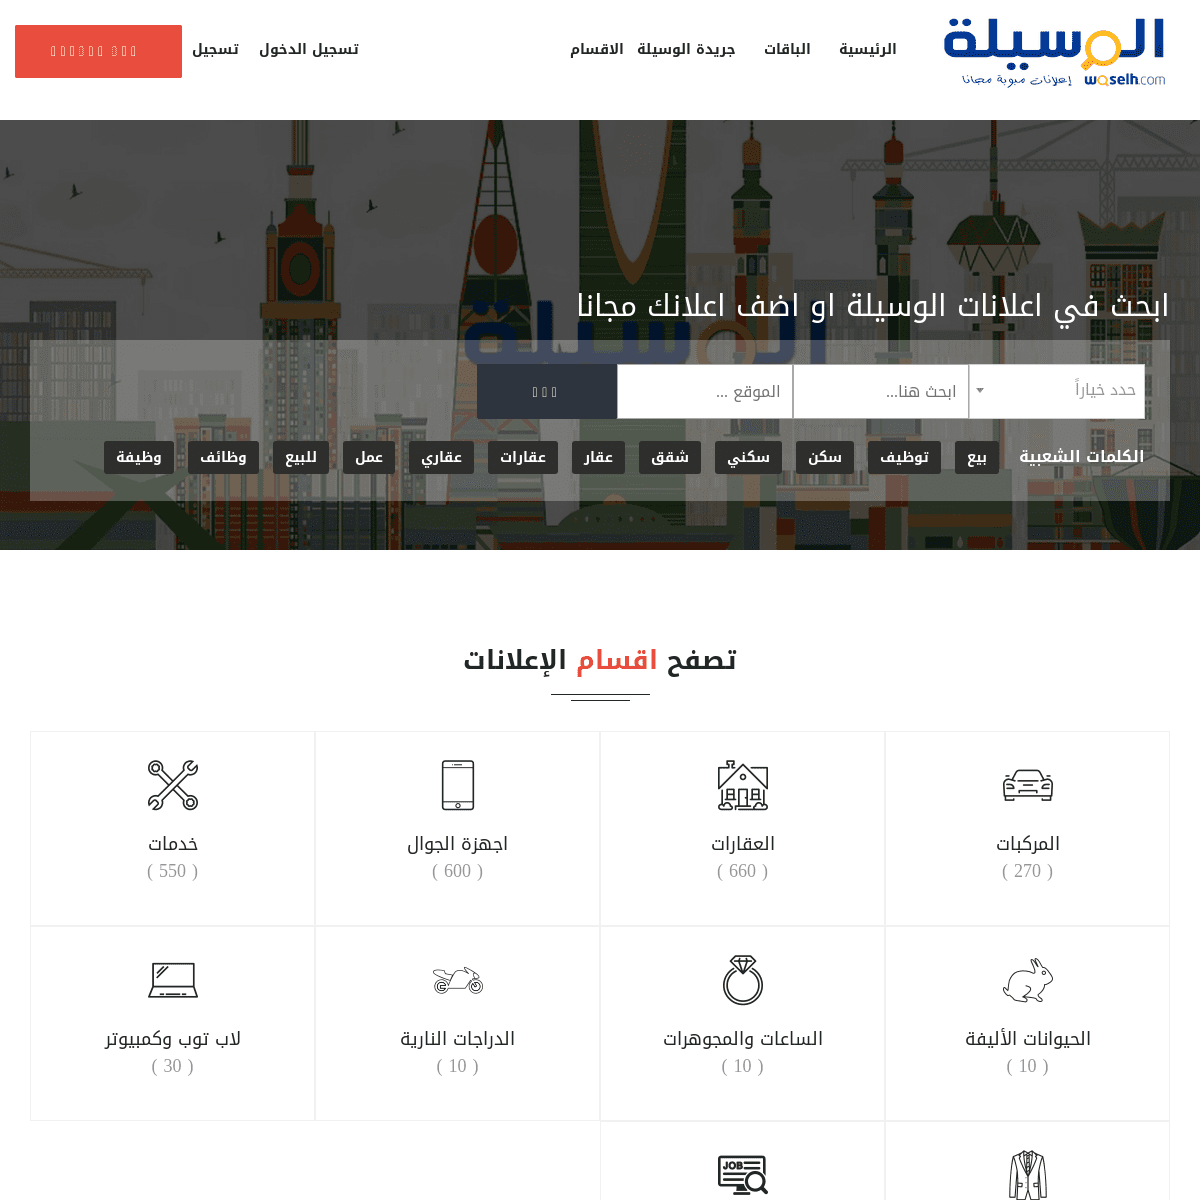 A complete backup of waselh.com